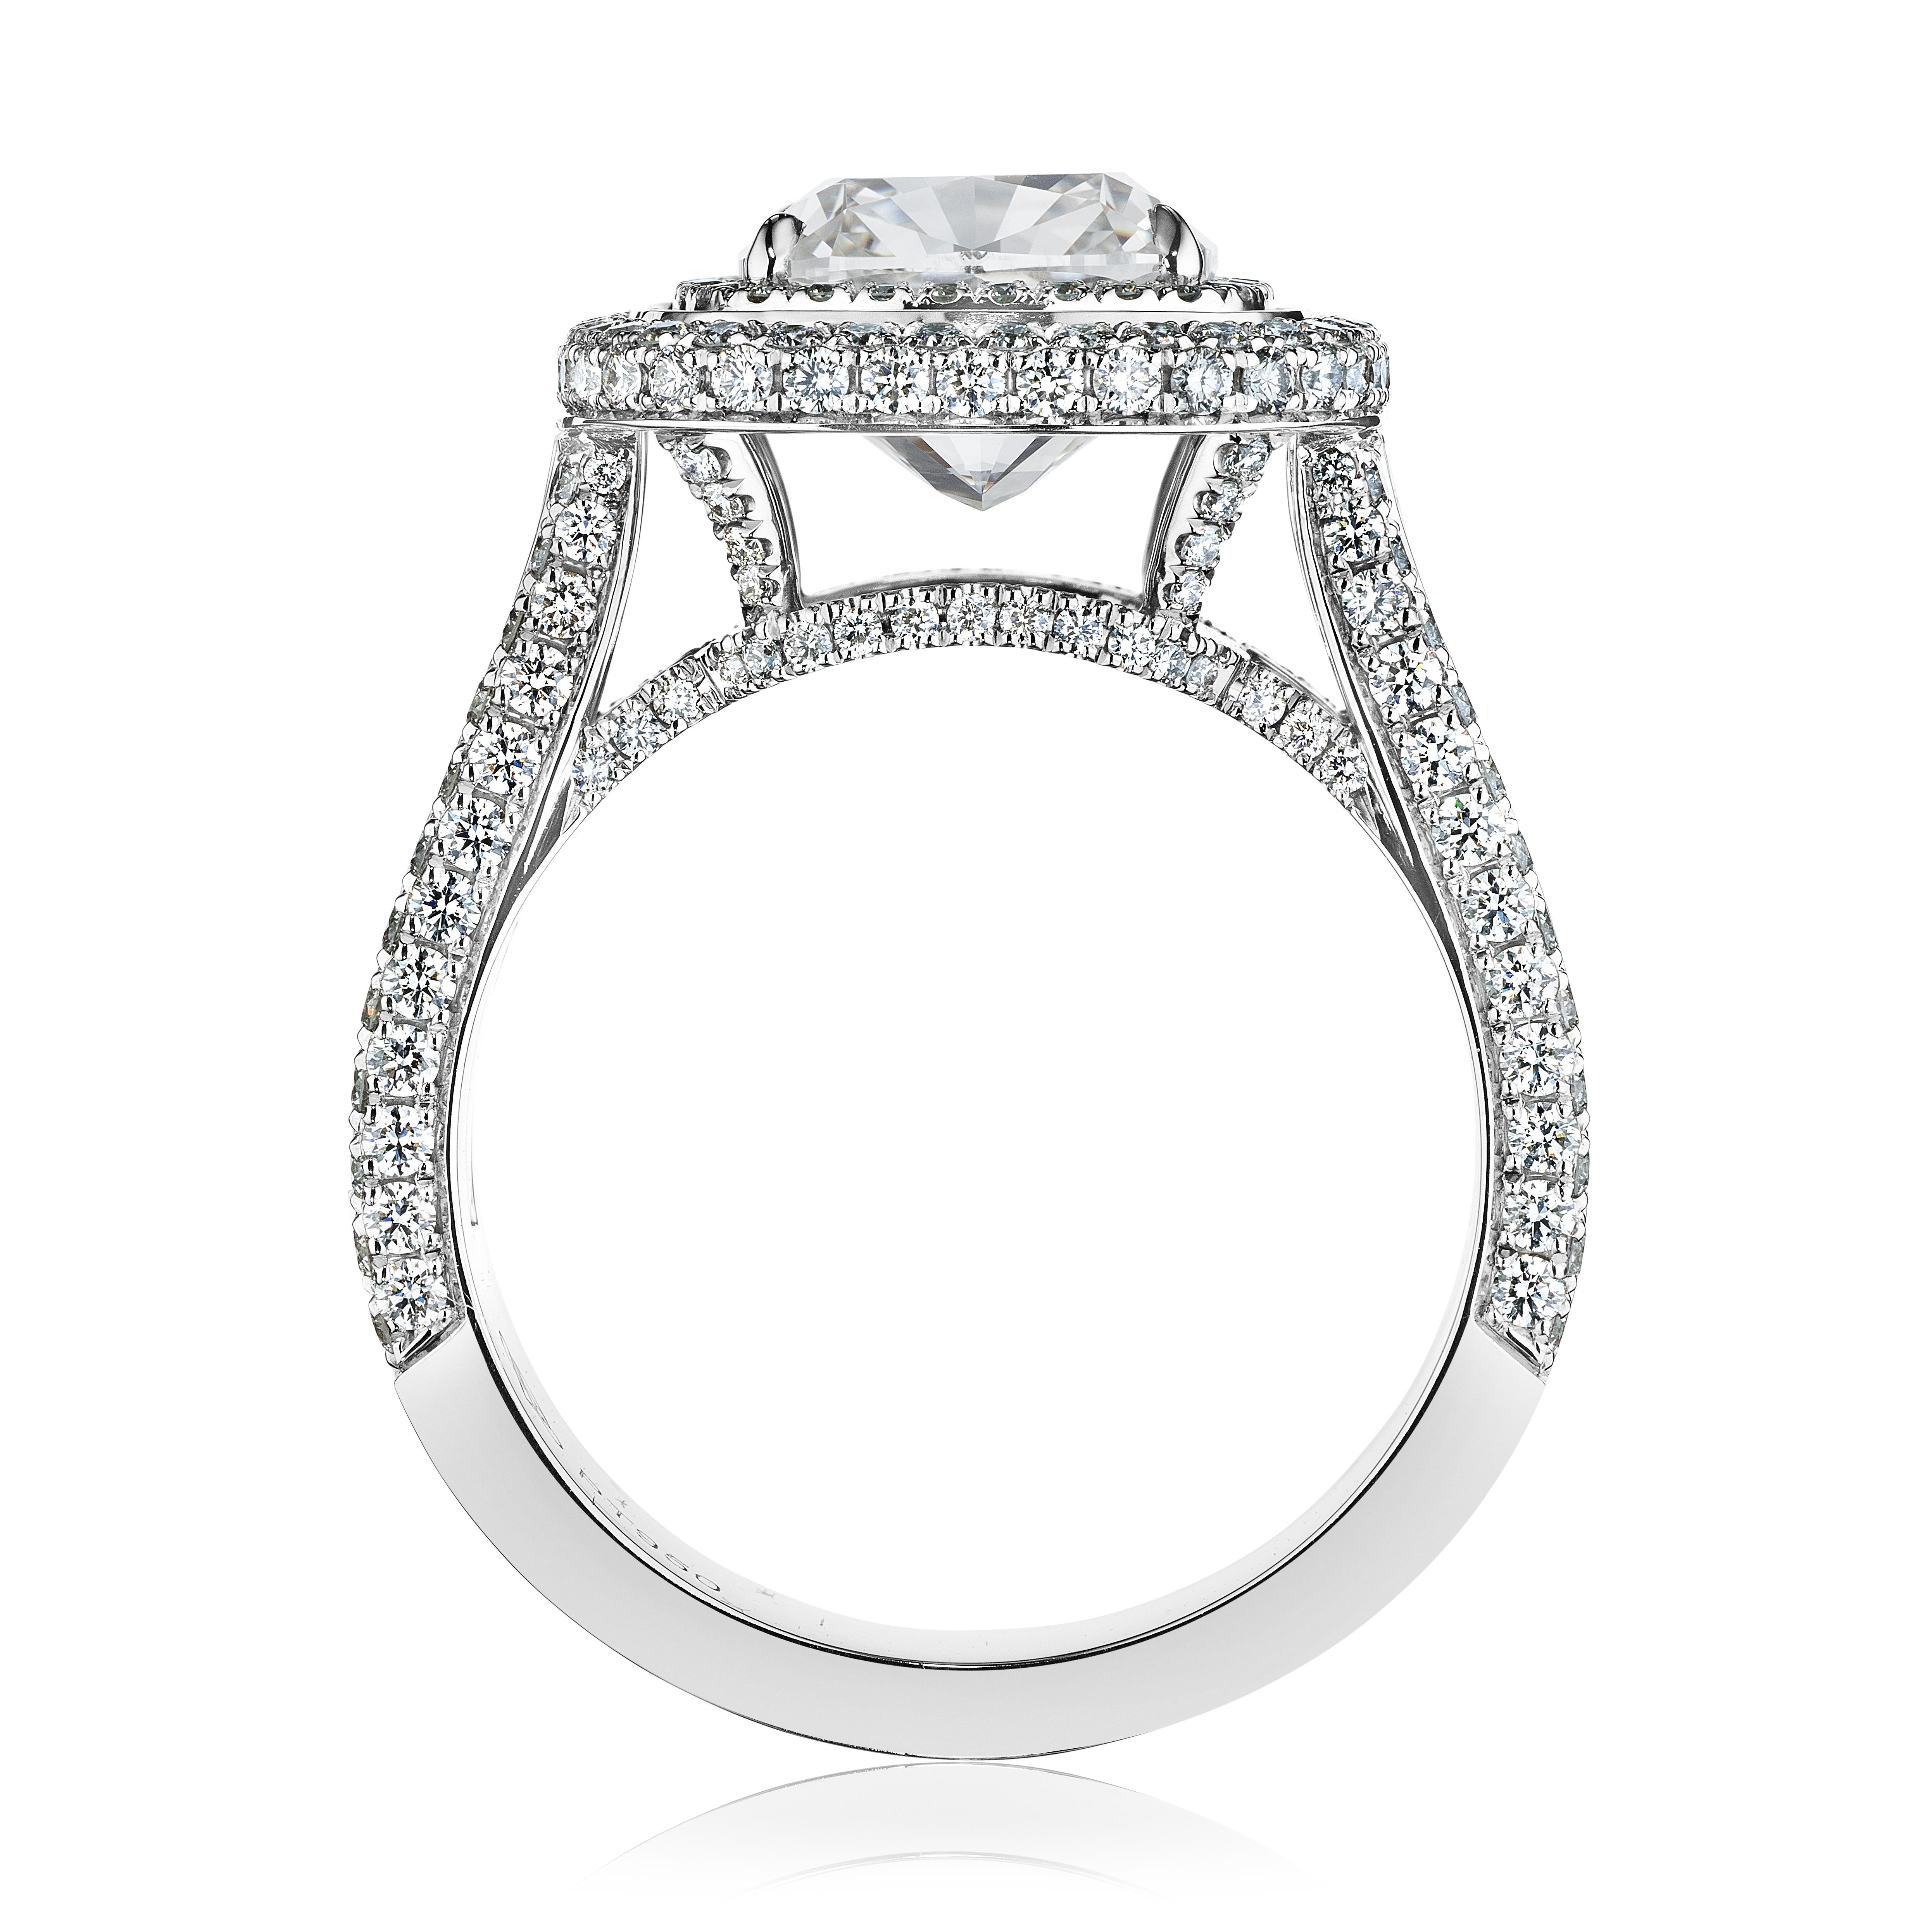 Unveil the splendor of bespoke elegance with this custom-made platinum engagement ring, featuring a majestic 3.5ct cushion-cut center stone. The centerpiece, a diamond of unparalleled clarity and mesmerizing depth, is cradled within a secure